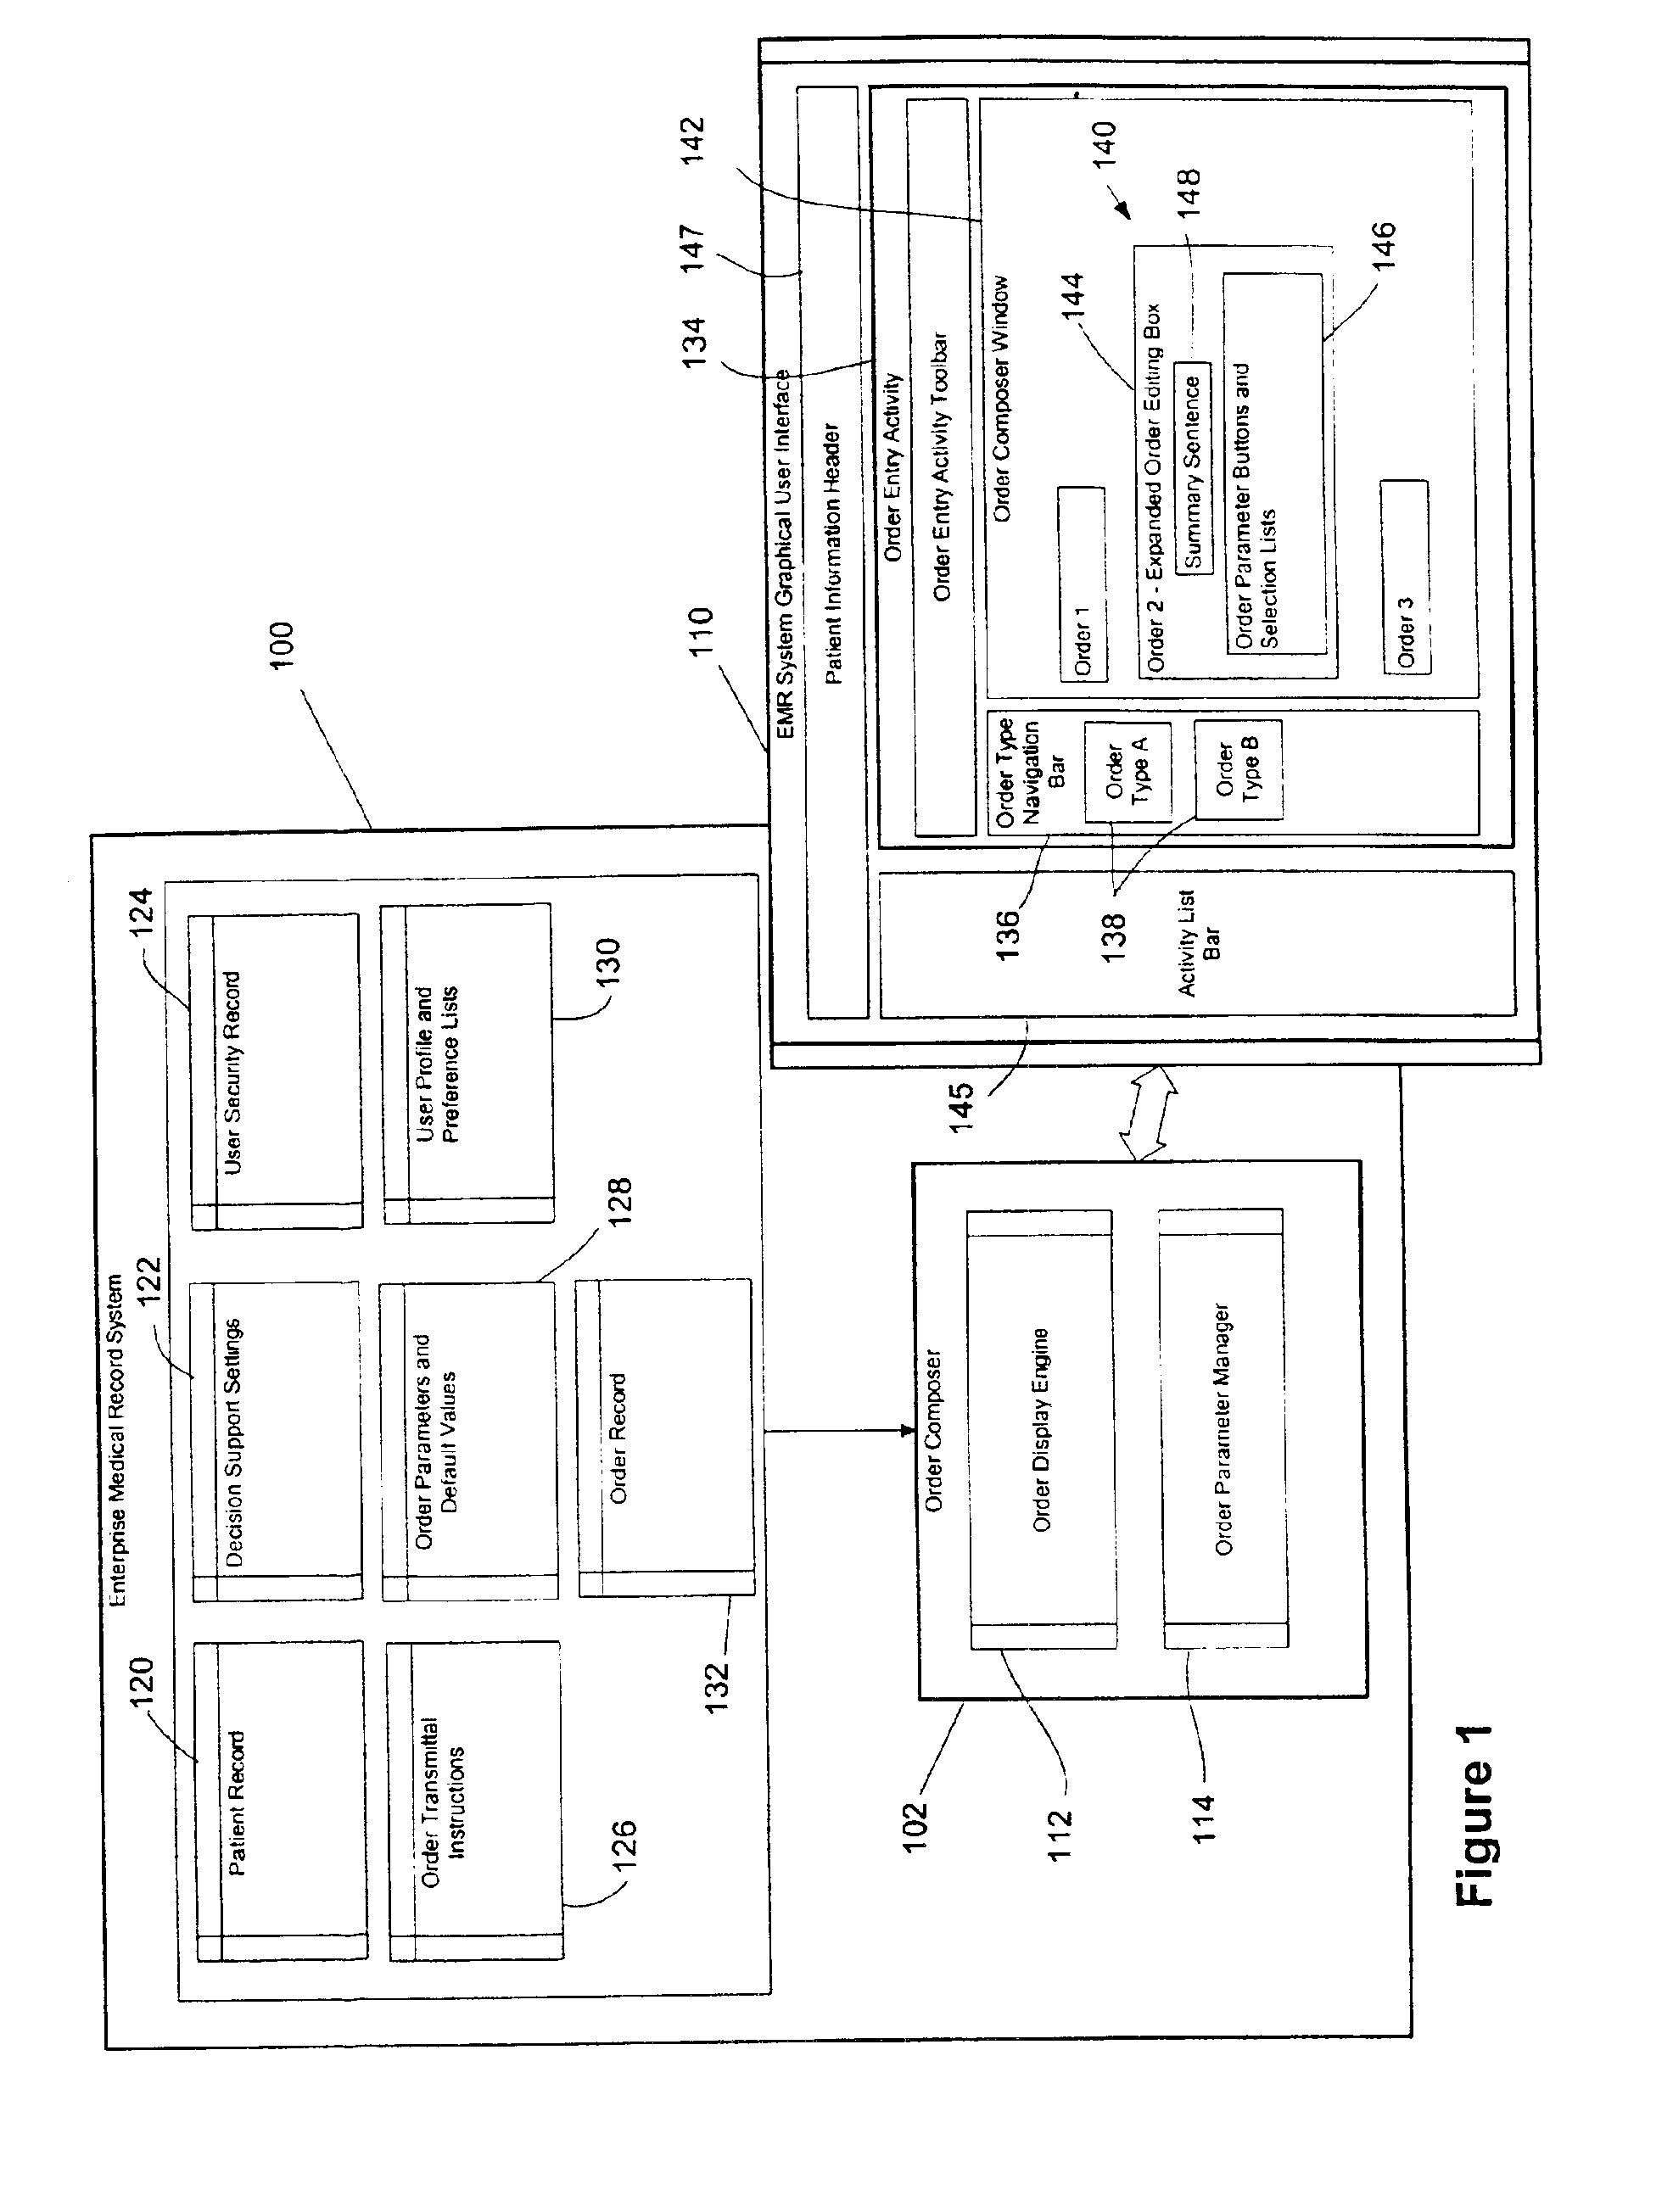 Electronic system for collecting and communicating clinical order information in an acute care setting